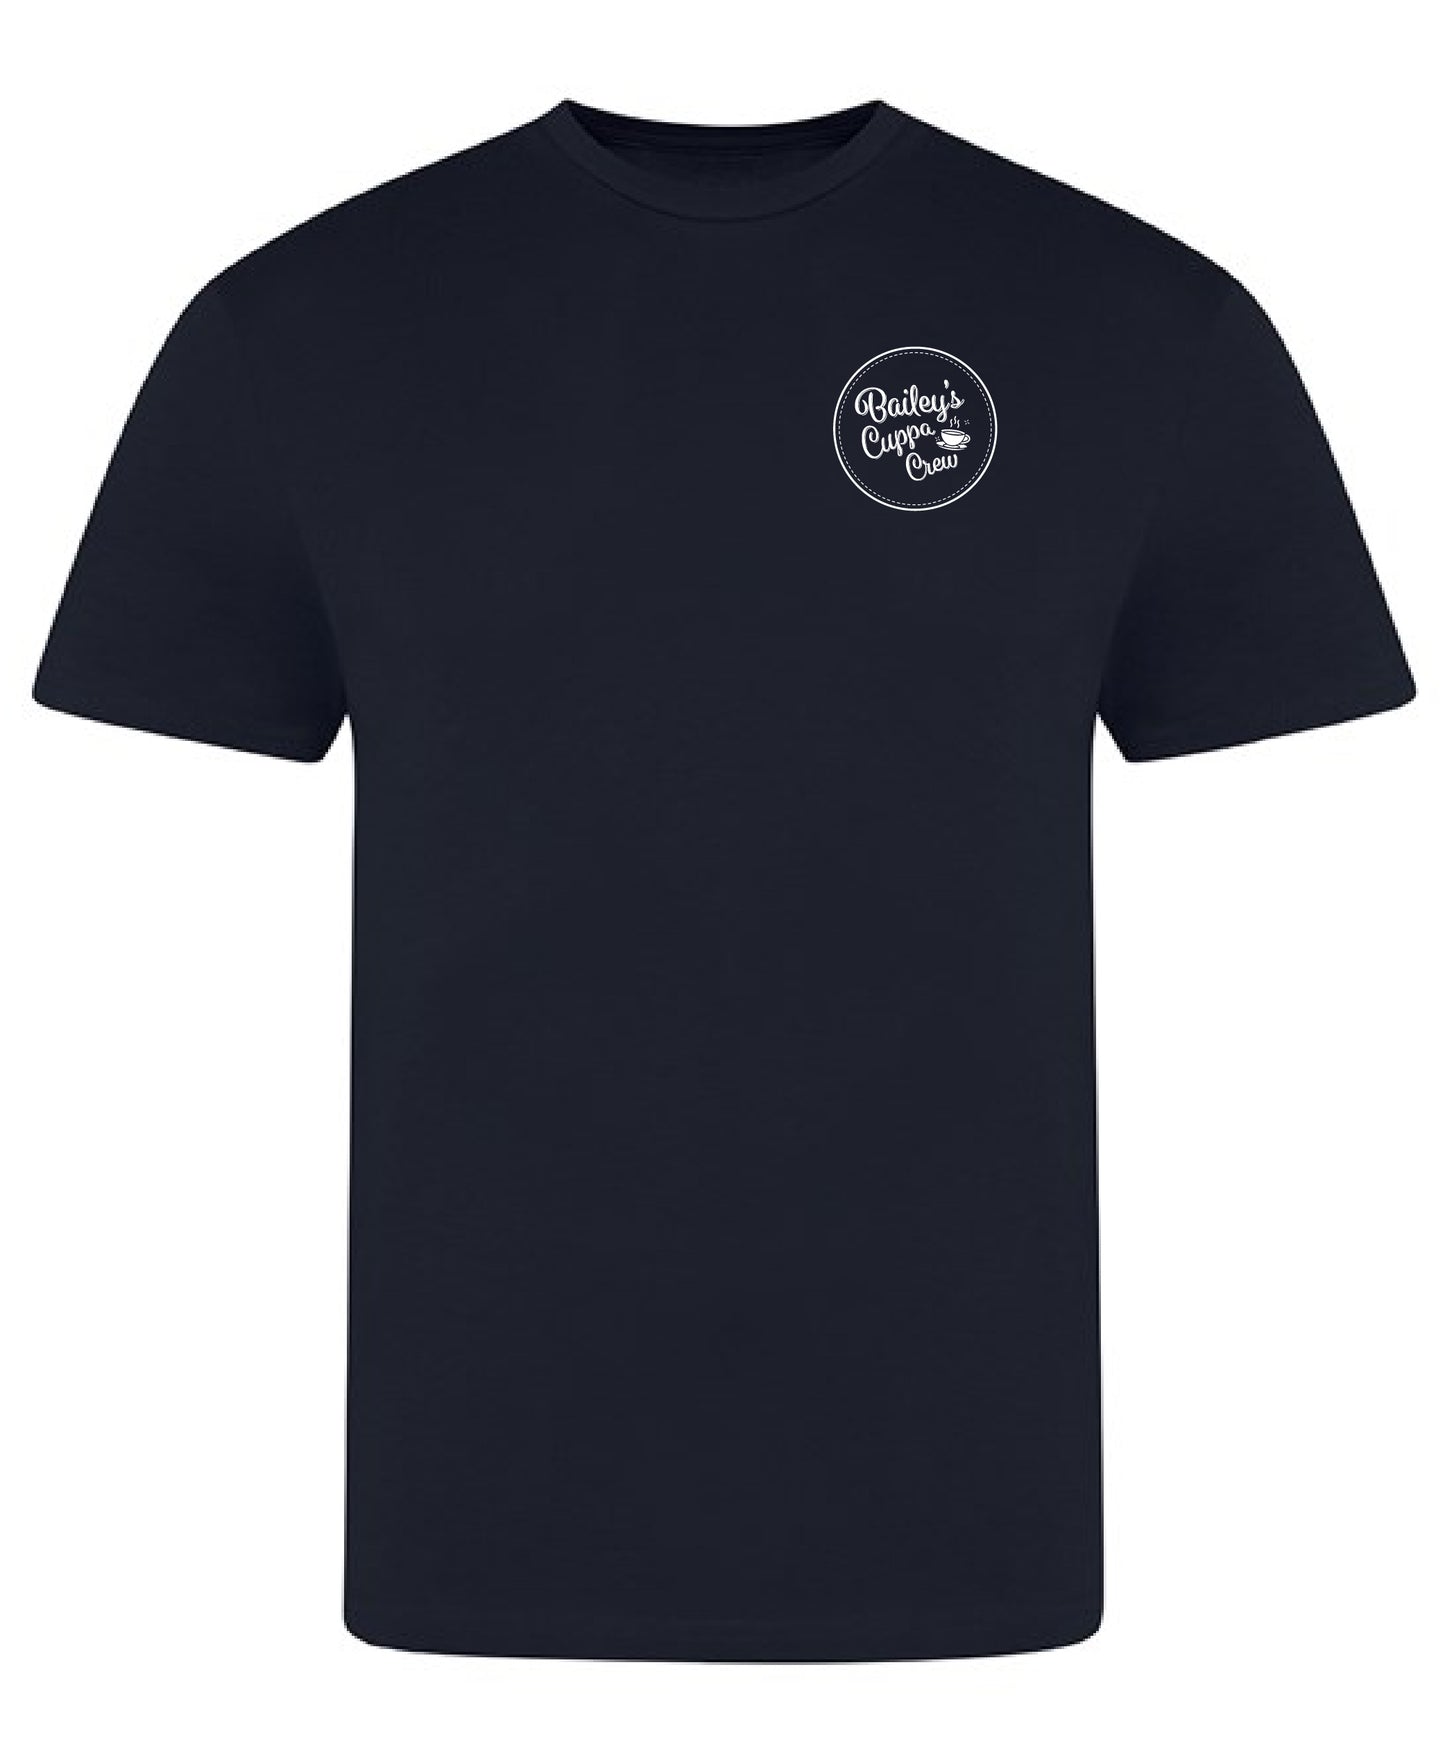 Bailey's Cuppa Crew Chest Logo T-Shirt